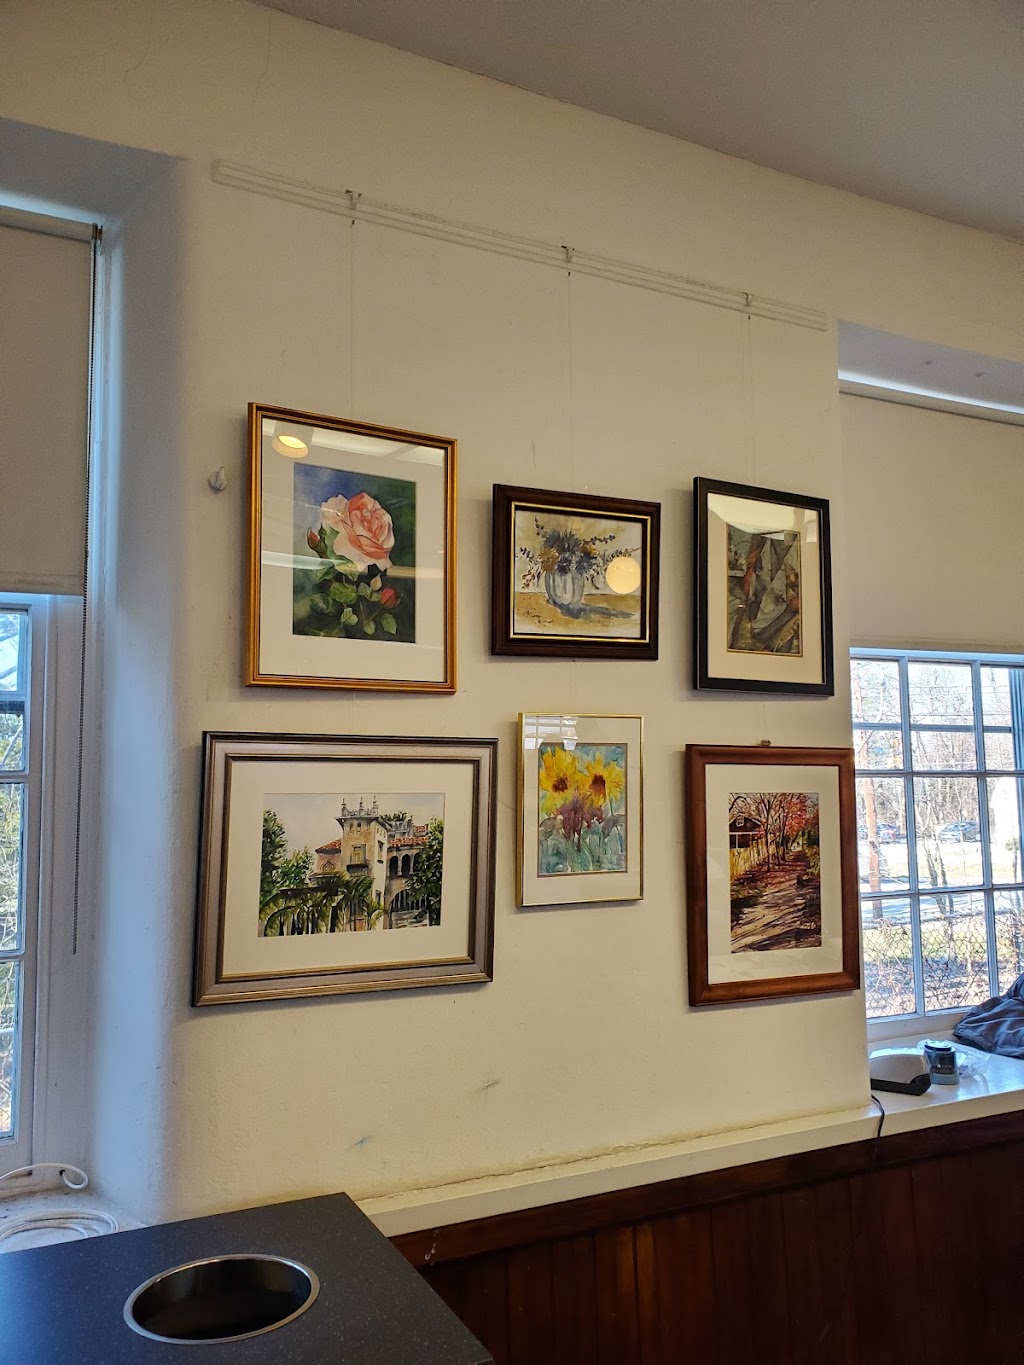 Greater Norristown Art League (GNAL 800 West) | 800 W Germantown Pike, Norristown, PA 19403 | Phone: (610) 539-3393